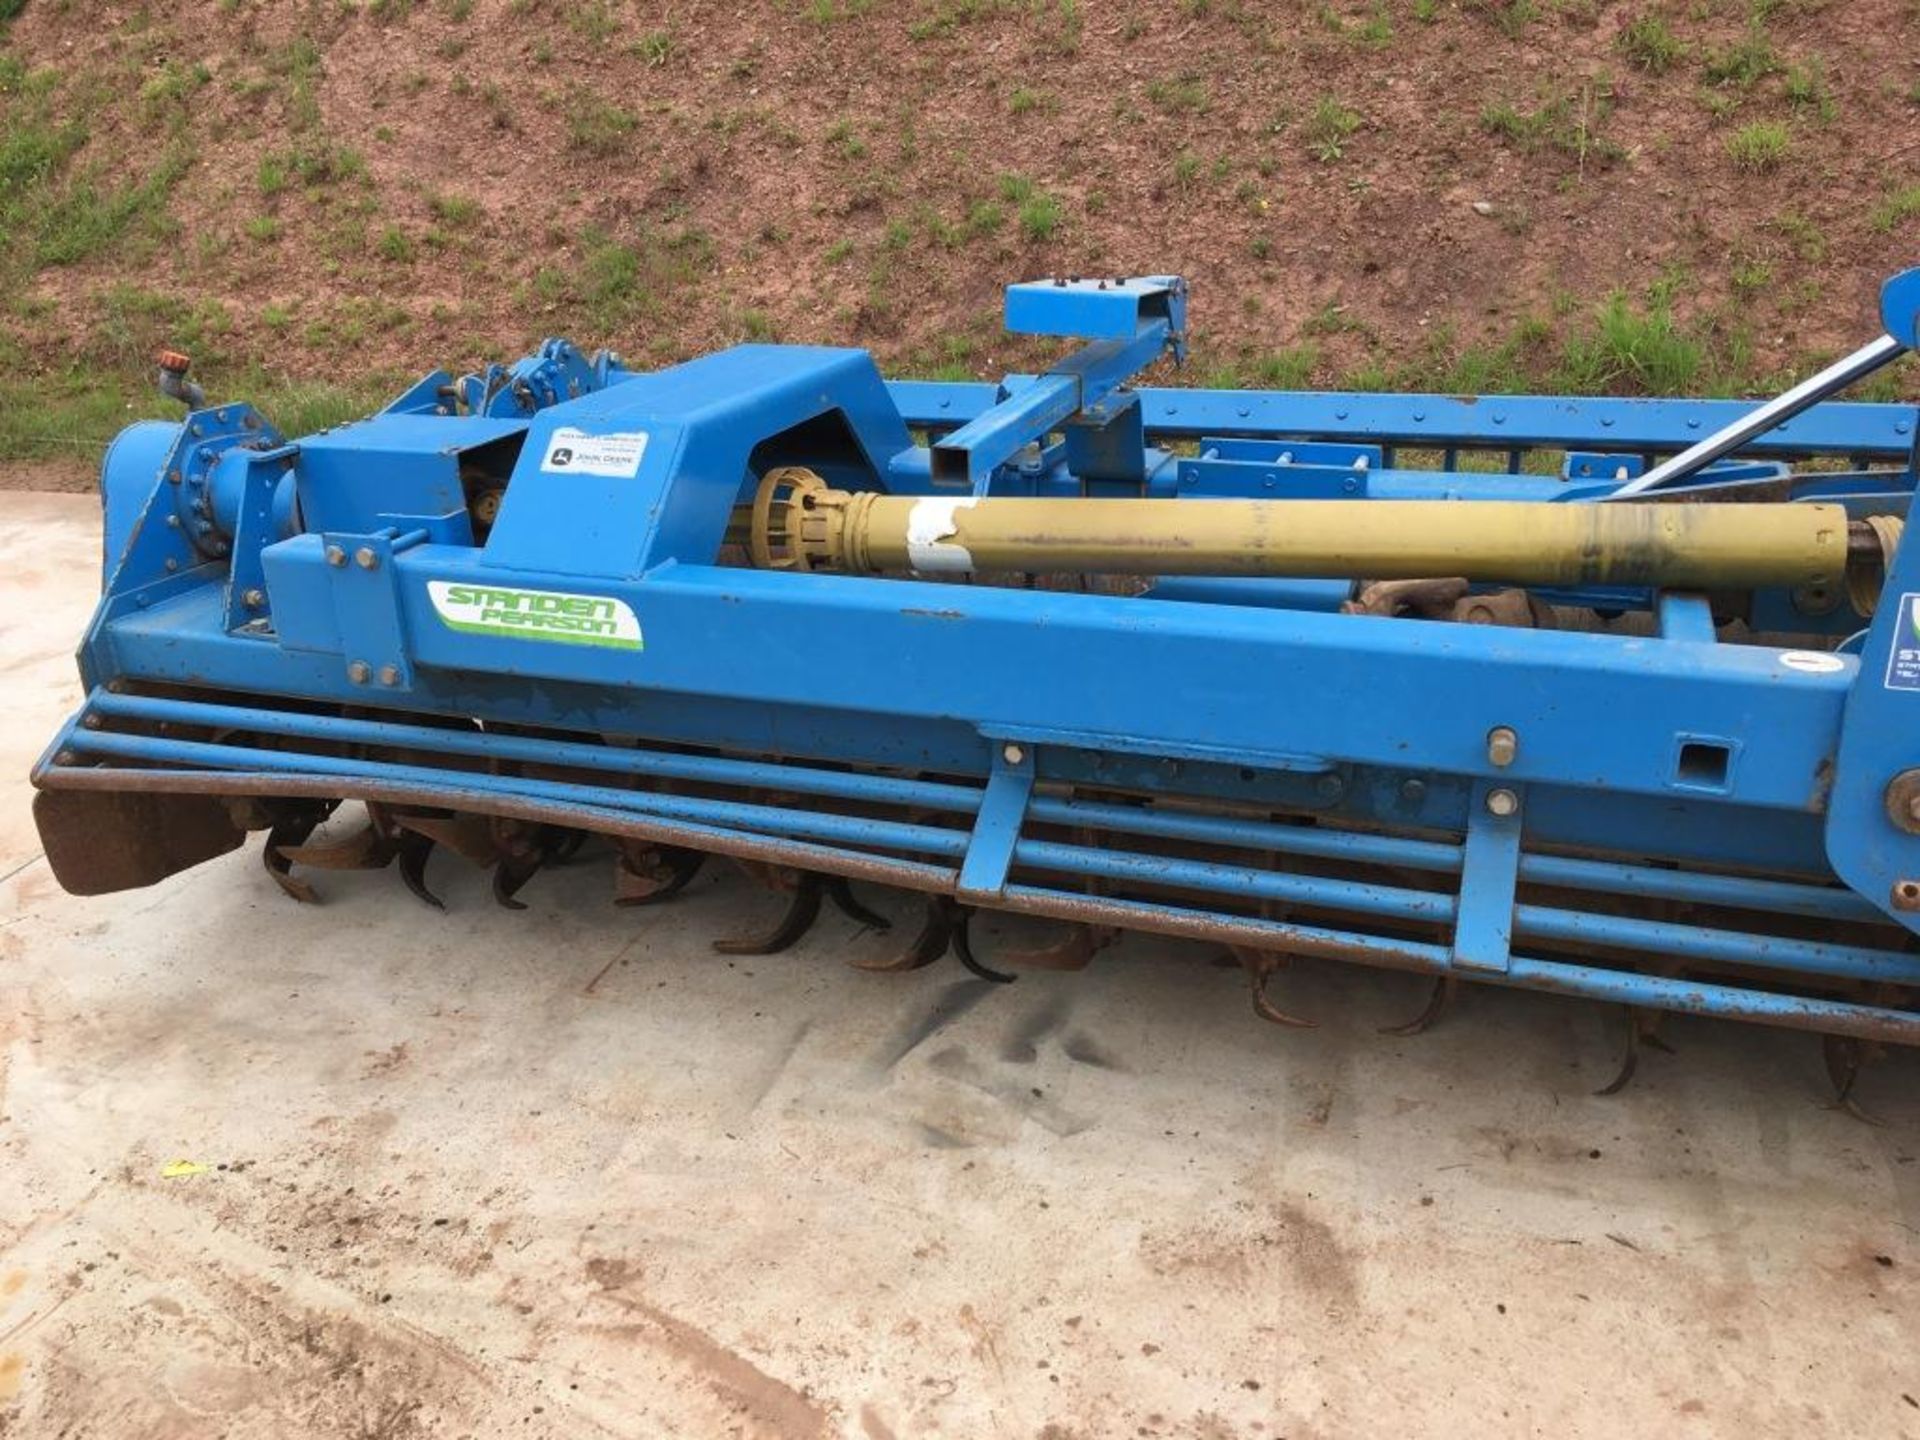 Standen folding rotovator, Type PV400240, serial number: 509 (2008) (missing guarding and damage - Image 7 of 16